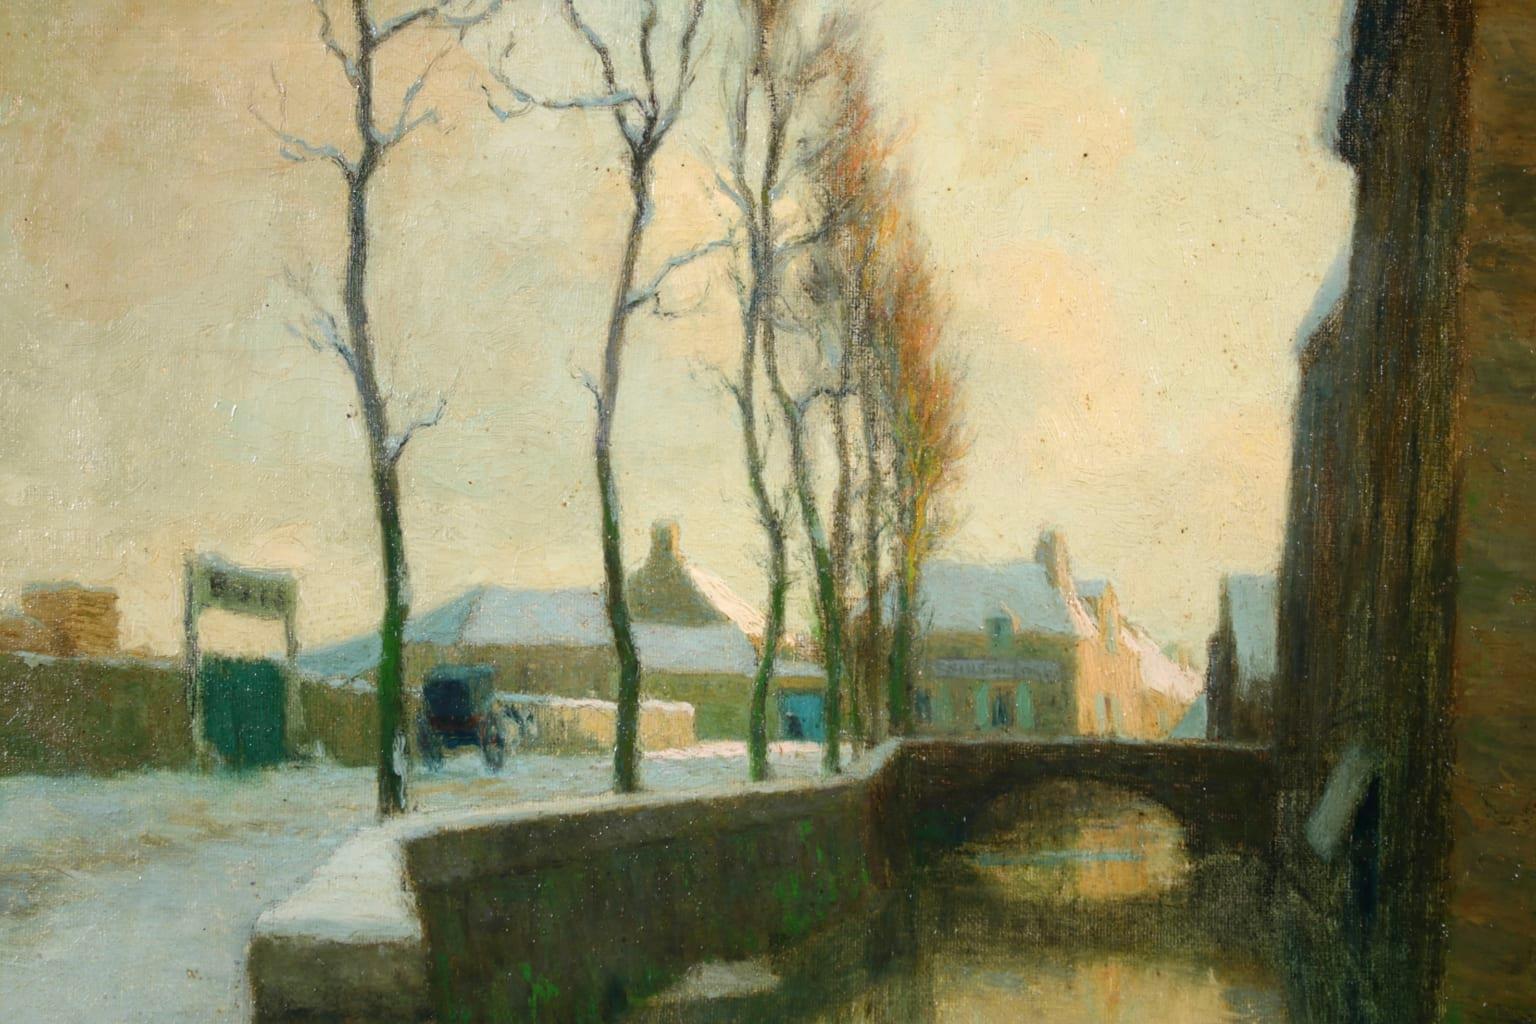 Winter Sunset - Impressionist Oil, River in Snowy Landscape by Alexandre Jacob 2